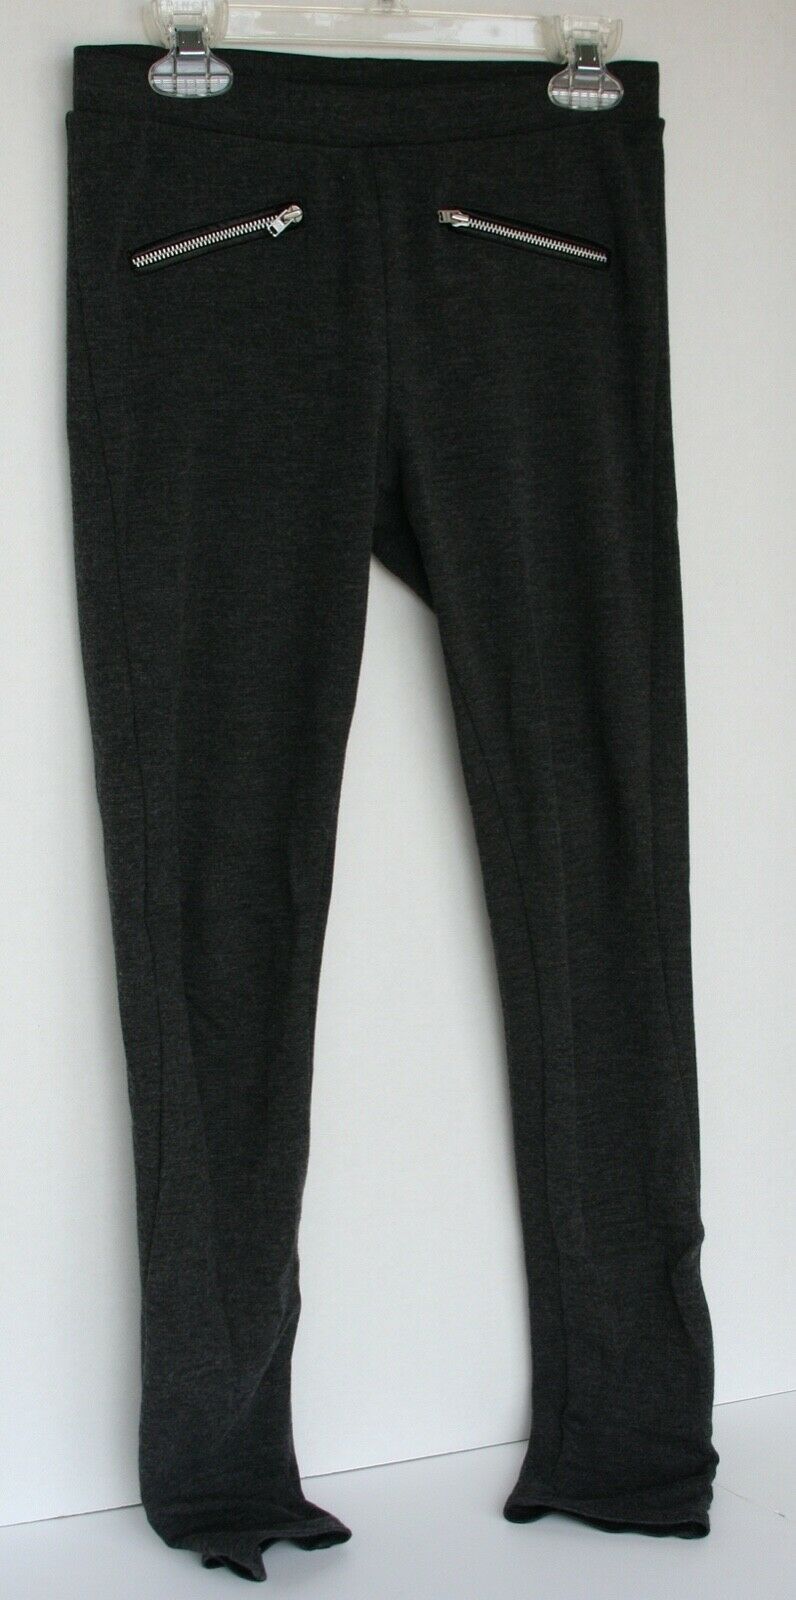 H&M Charcoal Gray Skinny Slim Pants with Front Zipper Pull On Girls 12-13 years - $11.87